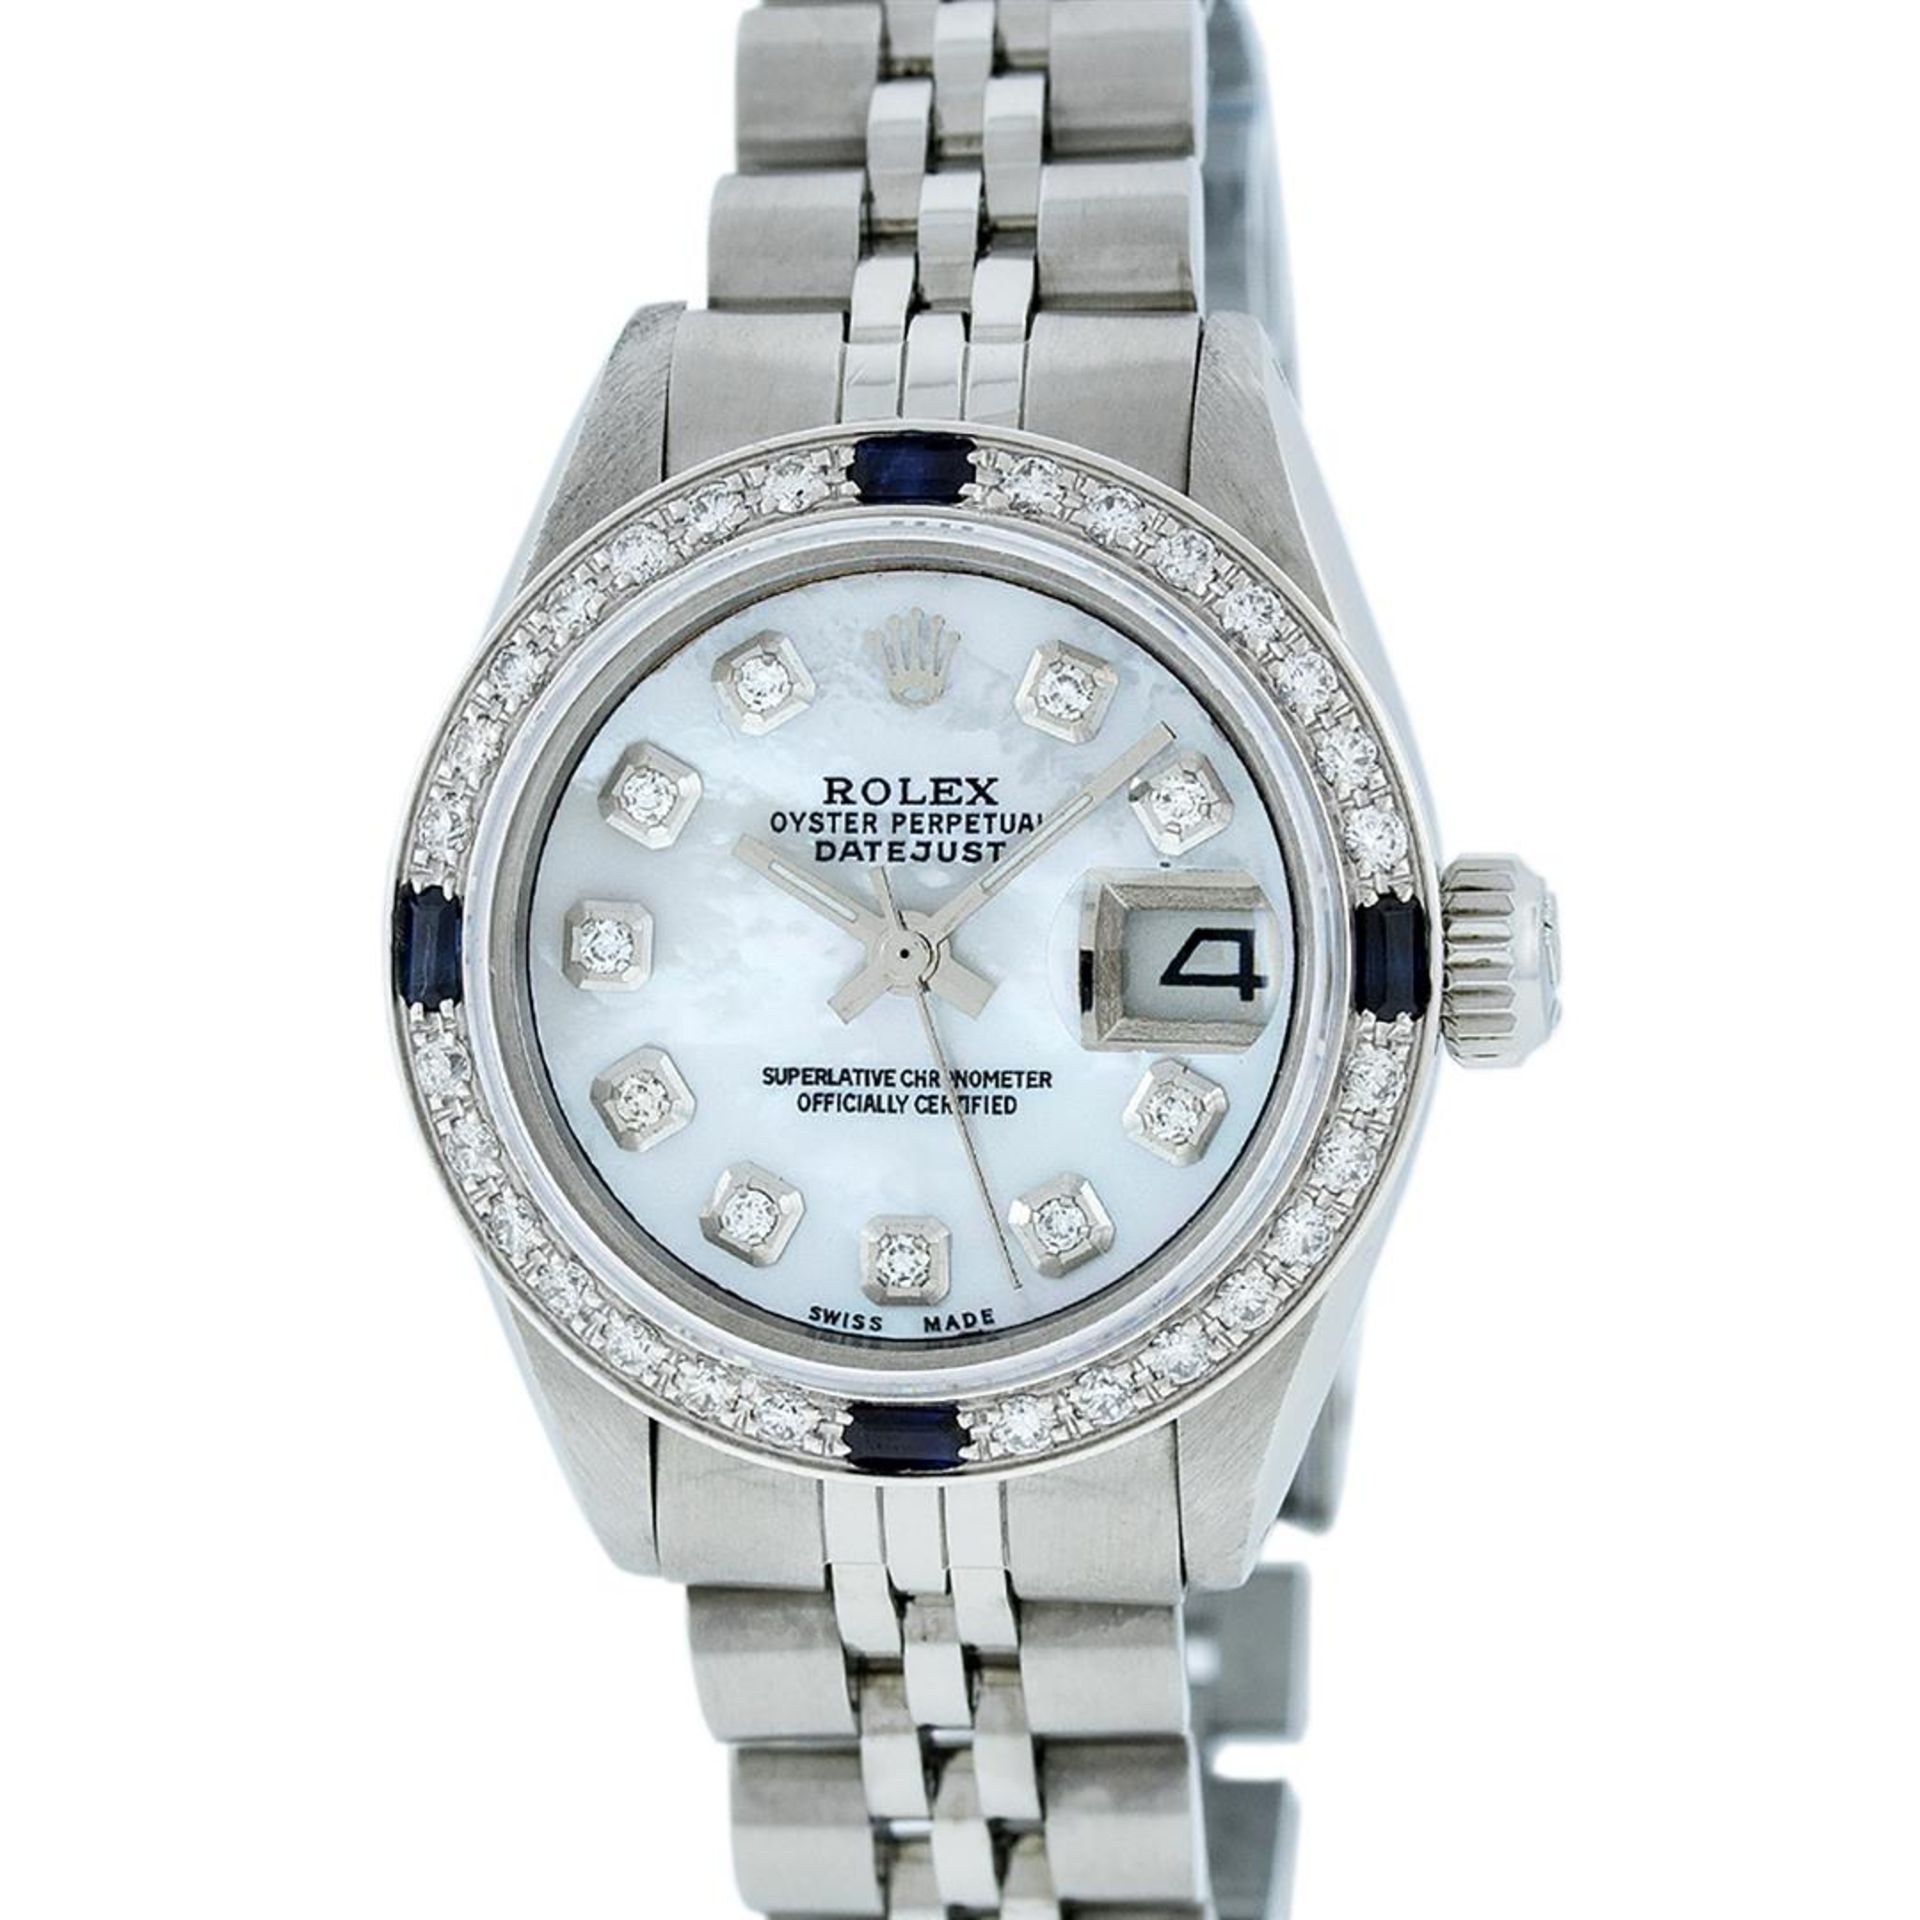 Rolex Ladies Stainless Steel Mother Of Pearl Diamond & Sapphire Datejust Wristwa - Image 5 of 9